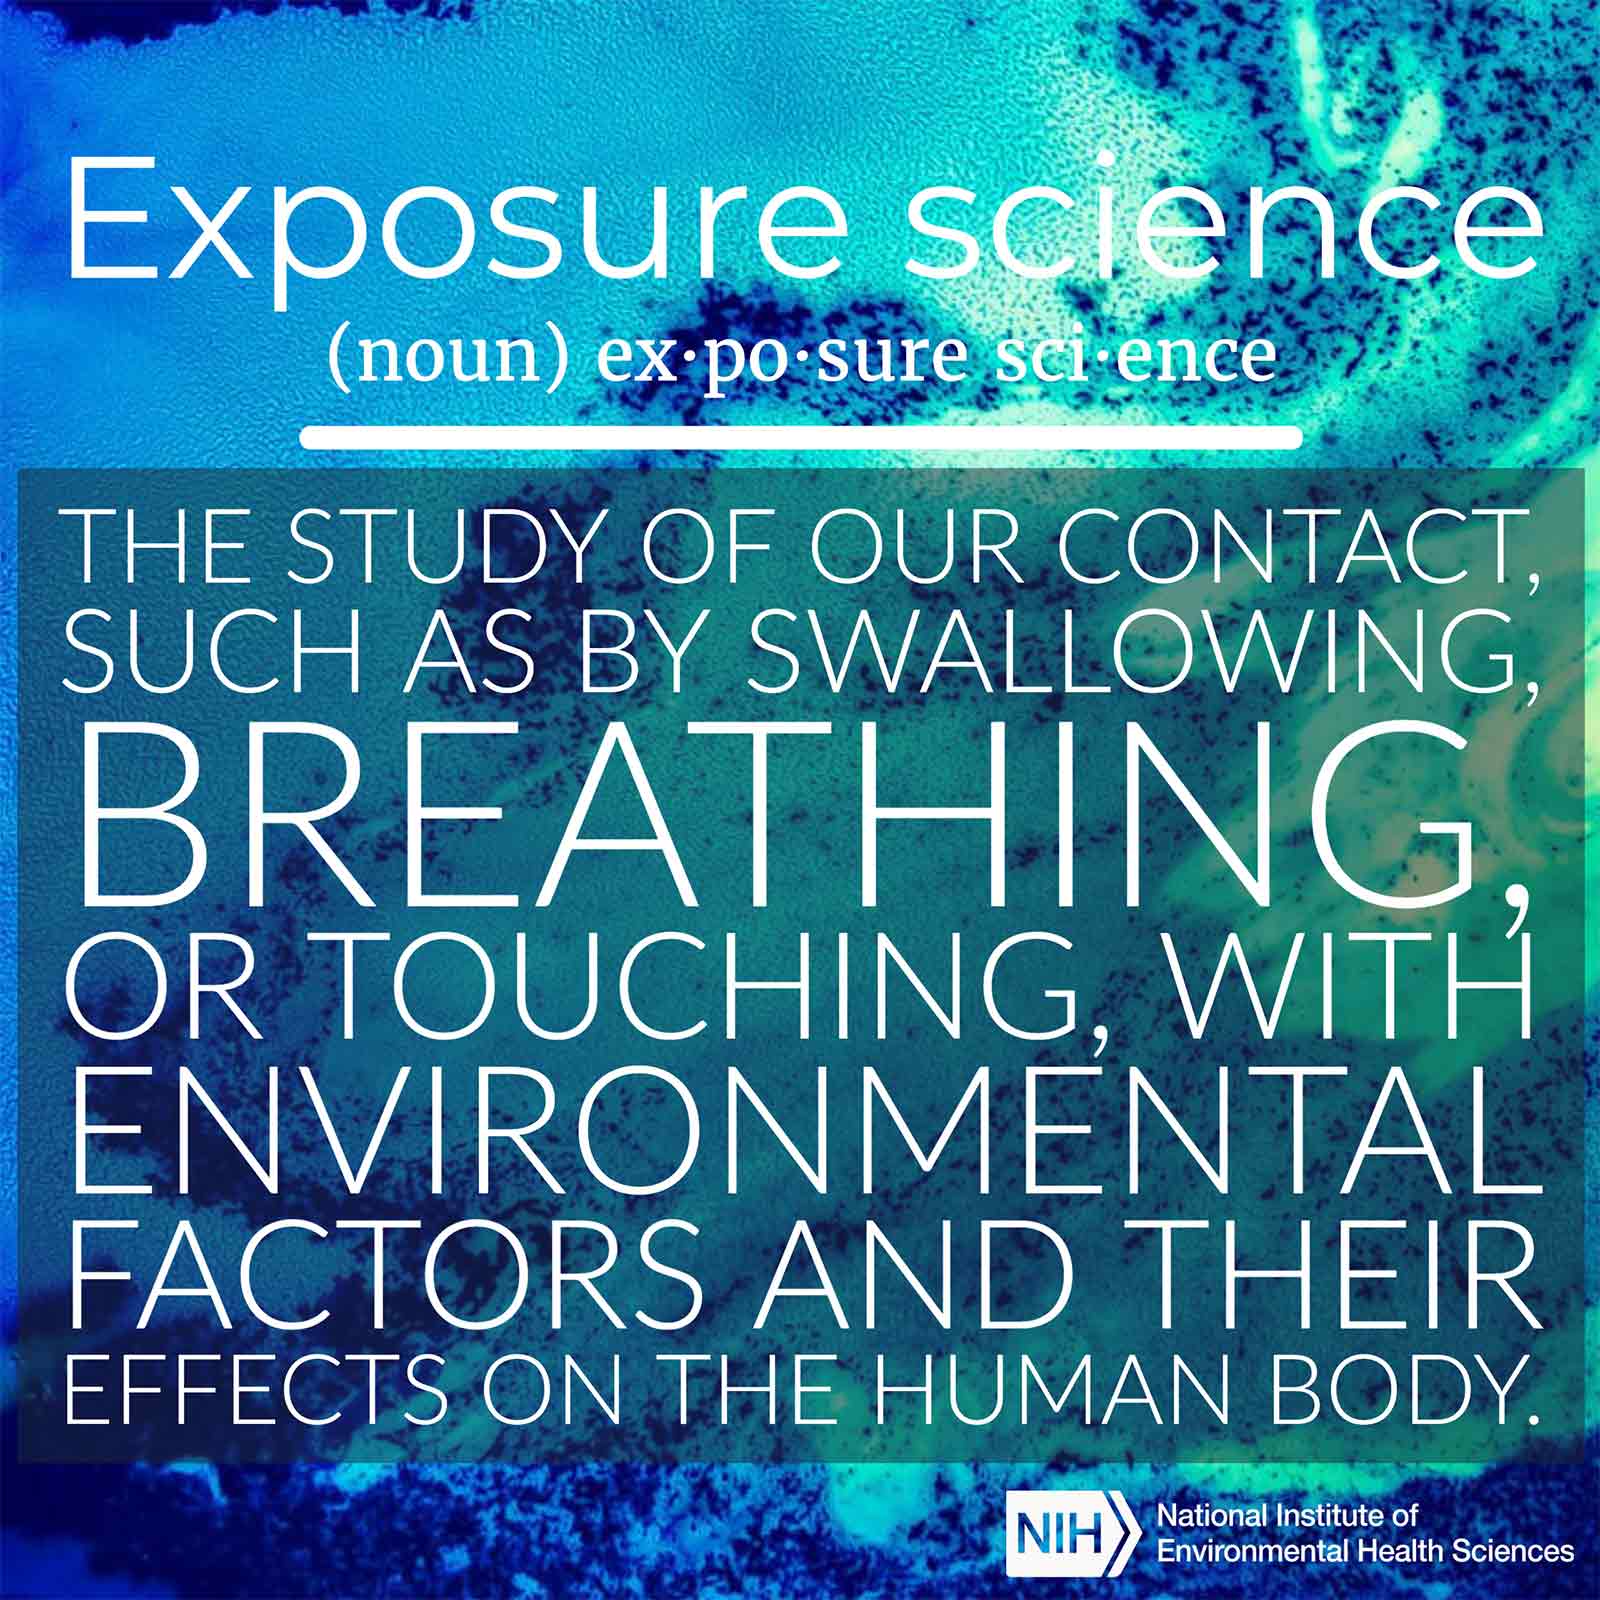 Exposure science (noun) defined as 'the study of our contact, such as by swallowing, breathing, or touching, with environmental factors and their effects on the human body.'